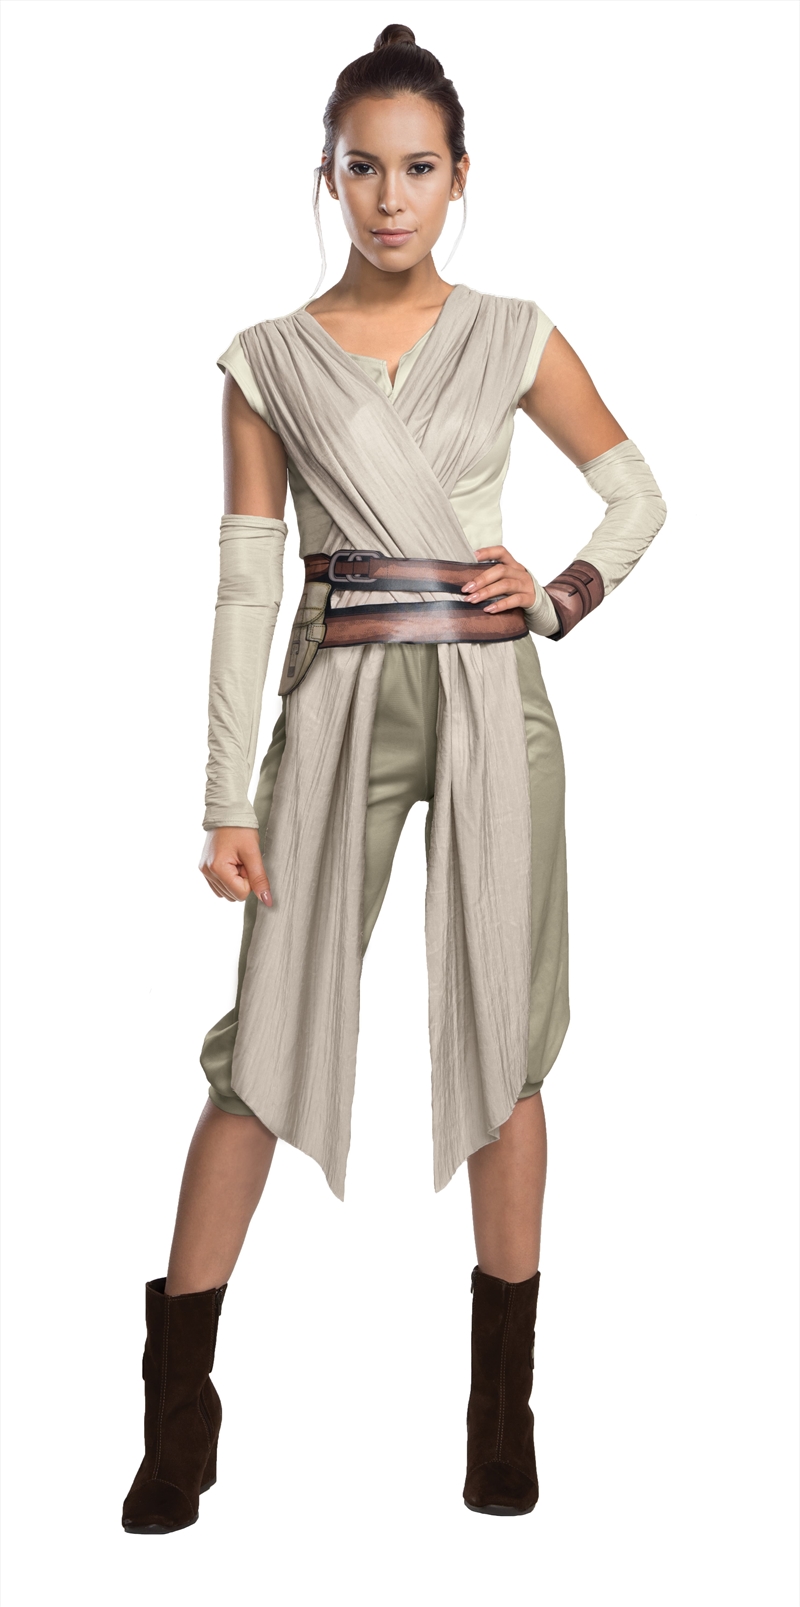 Rey Deluxe Adult Costume - Size S/Product Detail/Costumes